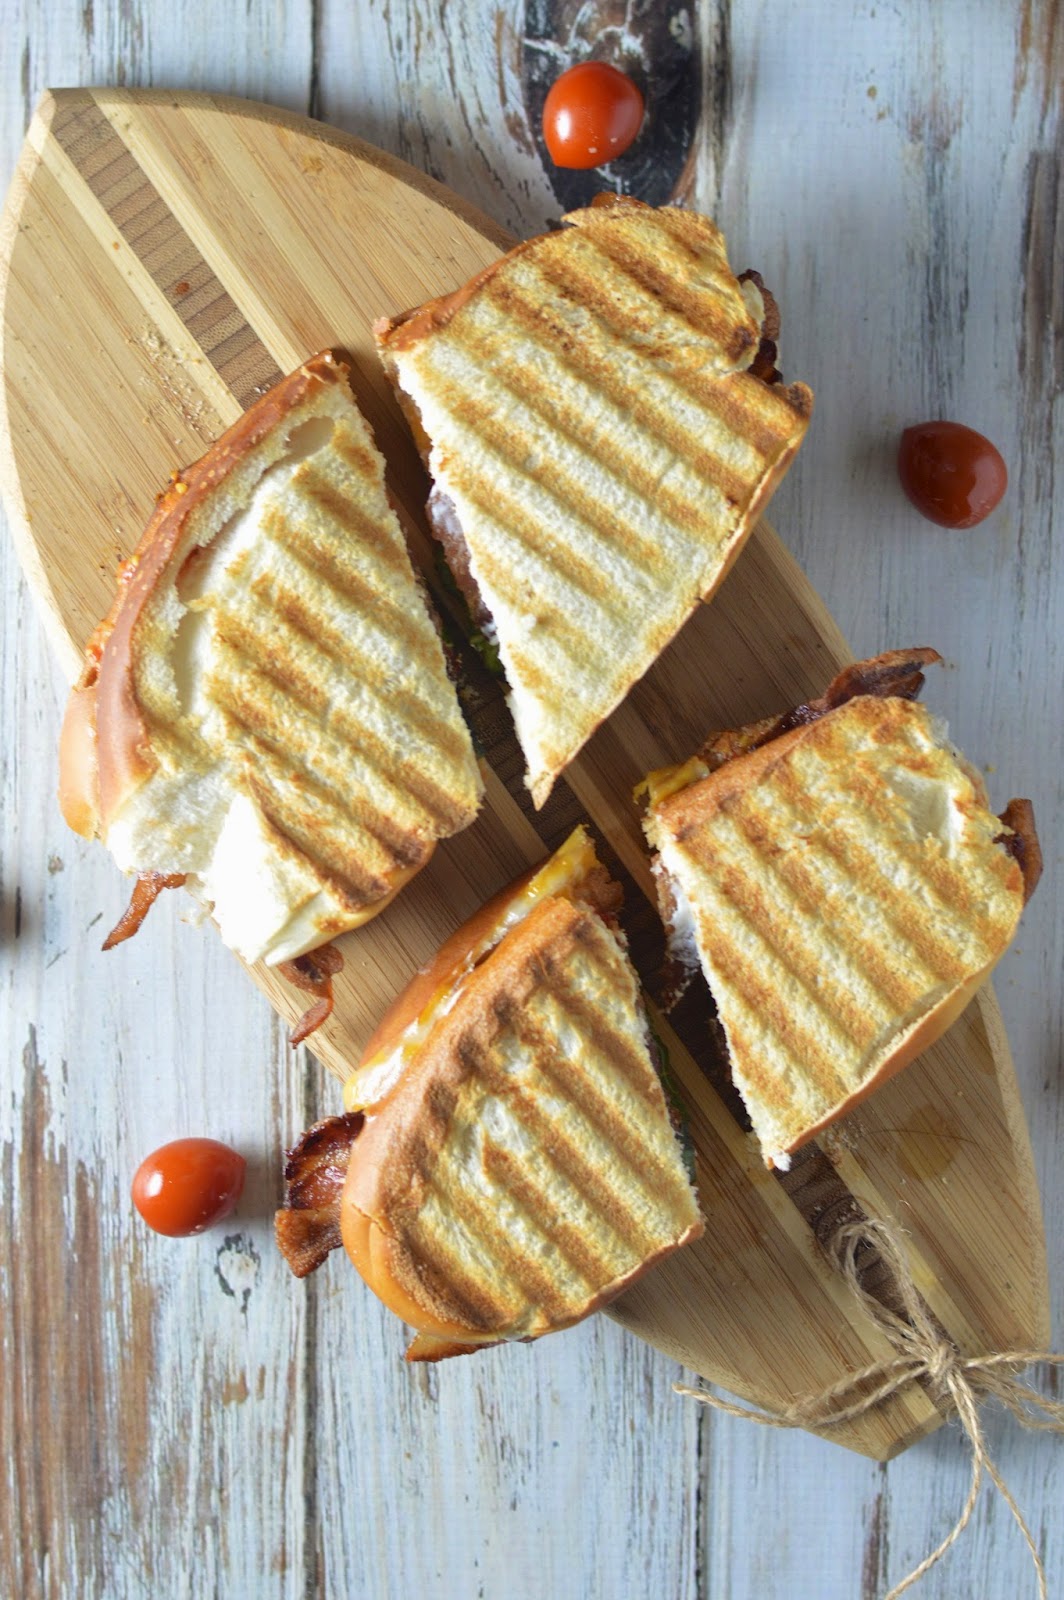 Grilled Cheese & Tomato Sandwich, Recipes